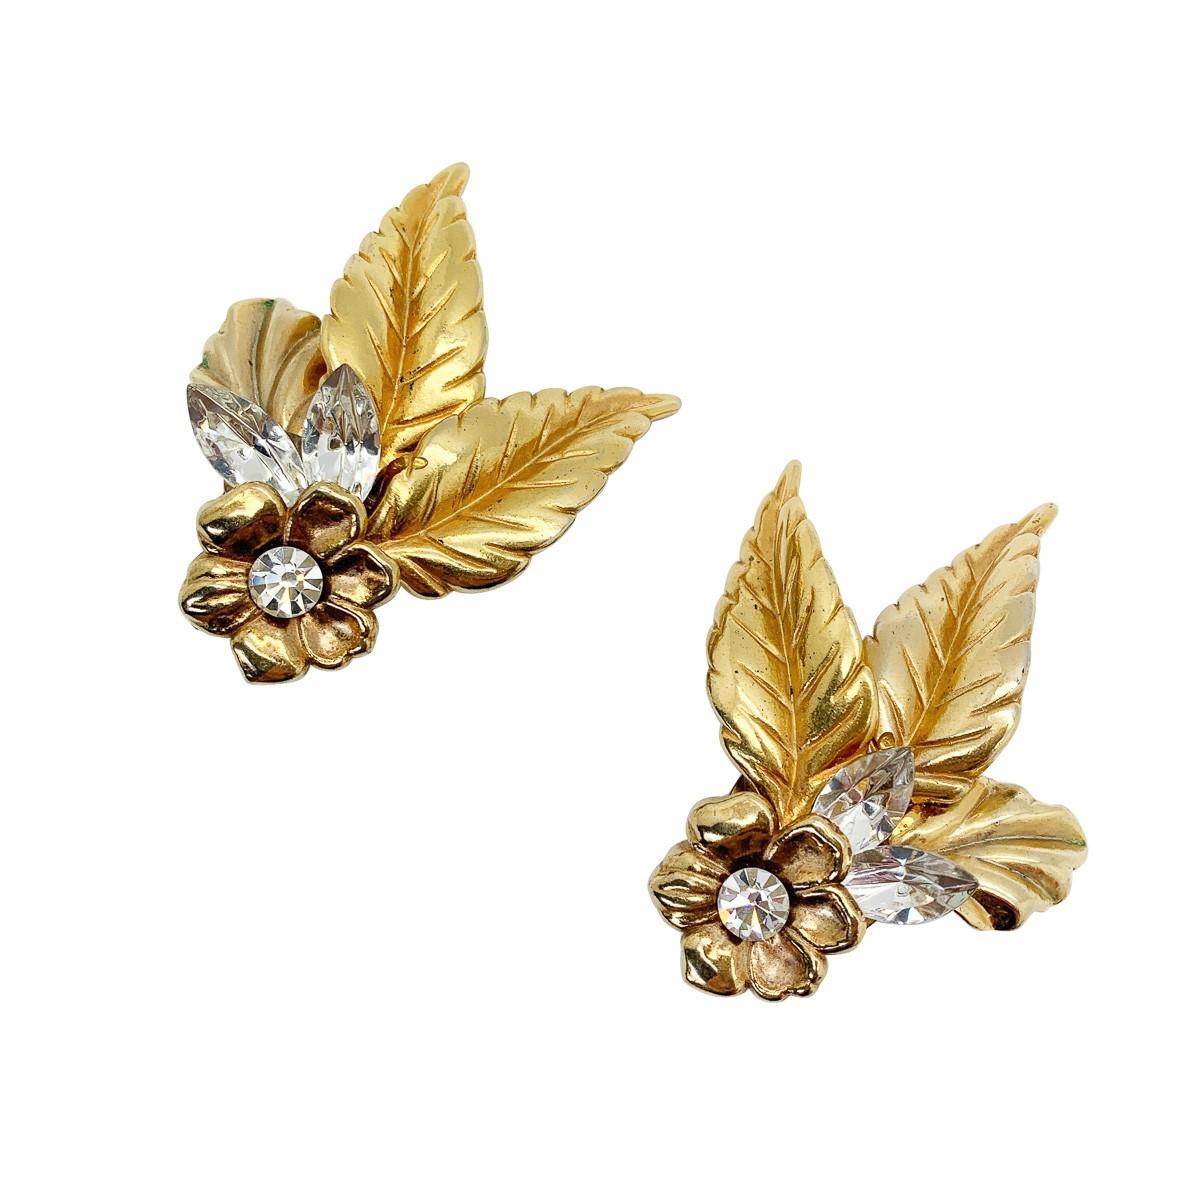 Vintage Crystal Leaf Earrings 1950s In Good Condition For Sale In Wilmslow, GB